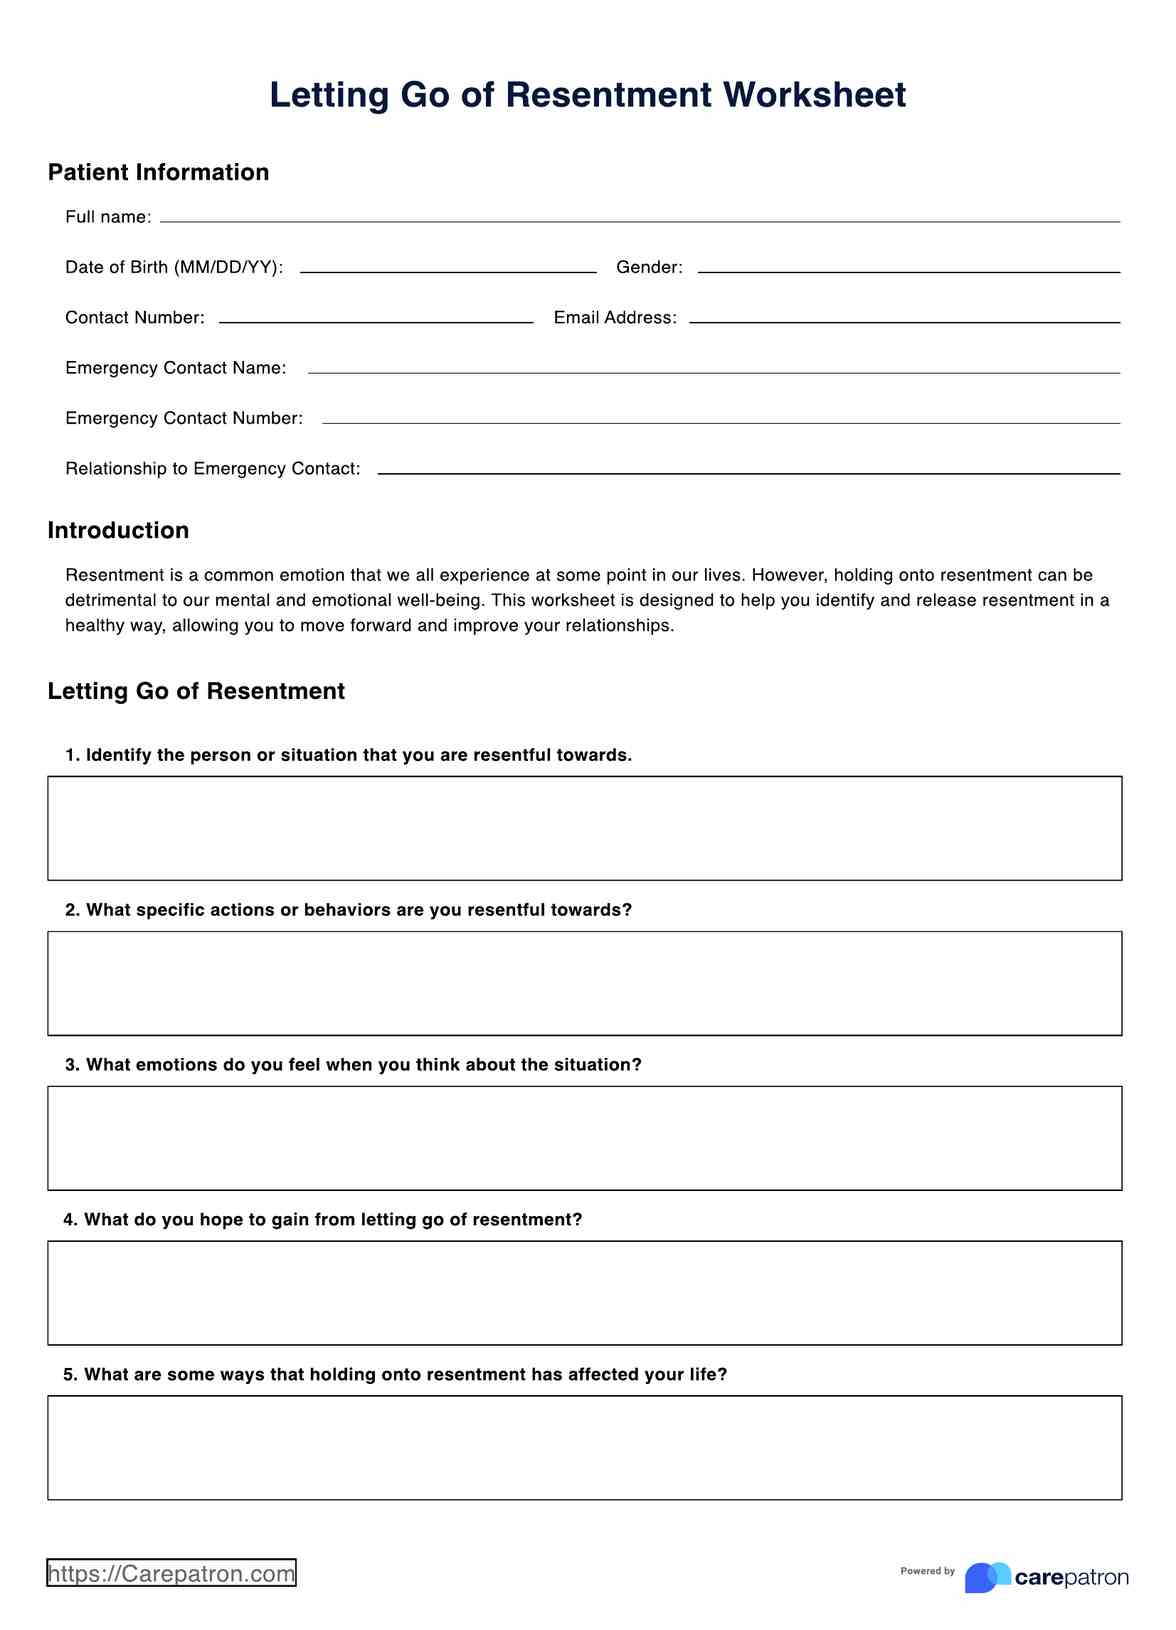 Letting Go Of Resentment Worksheet PDF Example